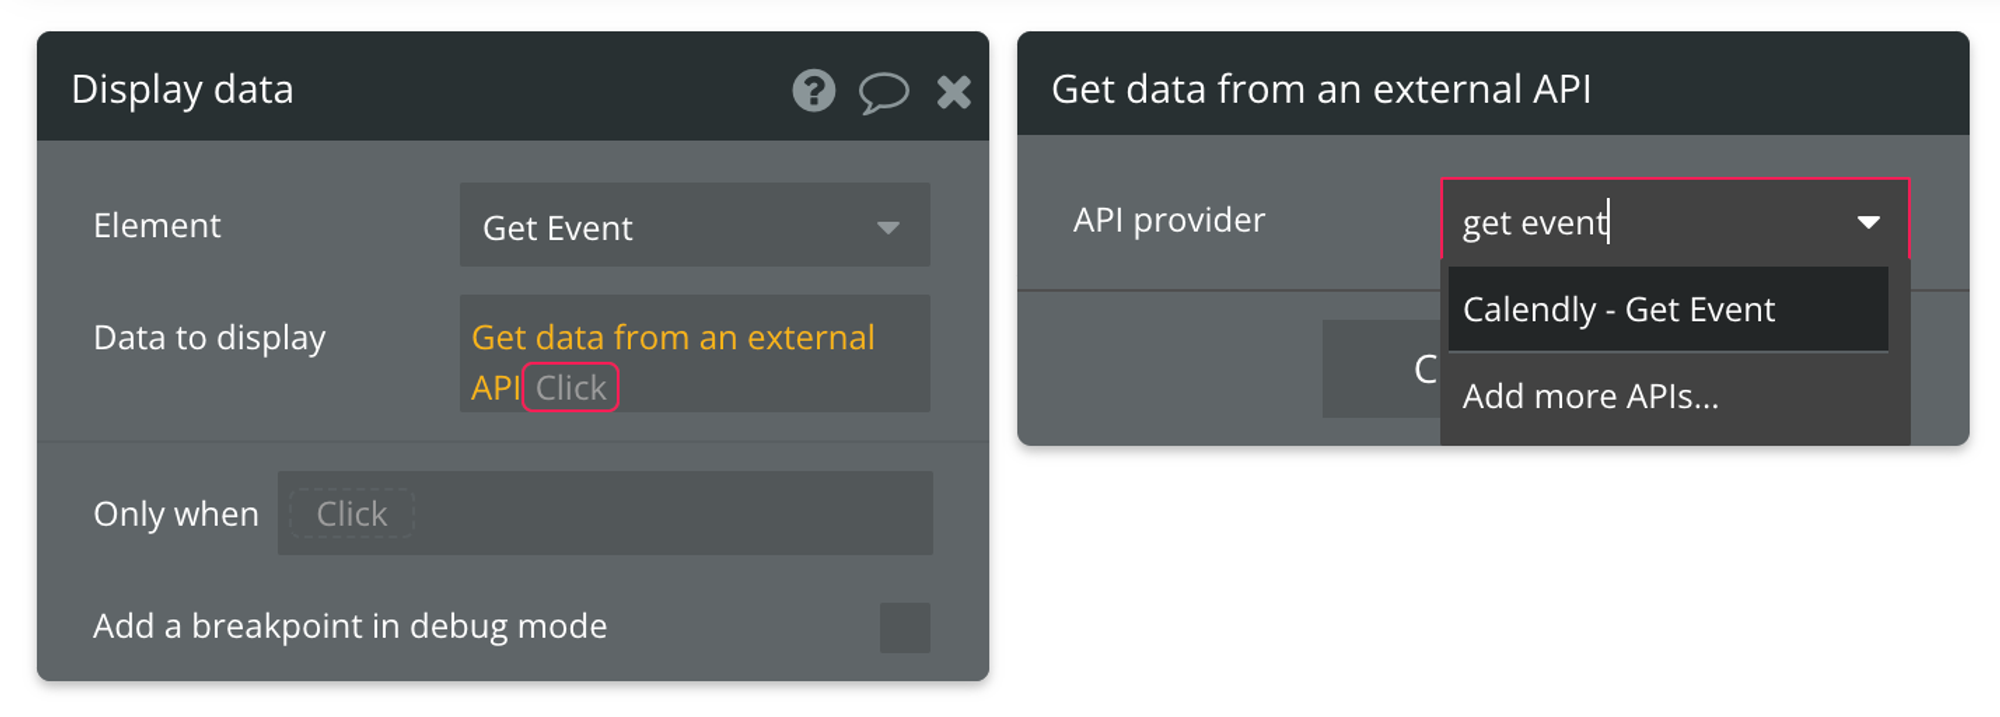 Select "Get data from external API" from the list of data sources, then find Calendly - Get Event from the list of API providers